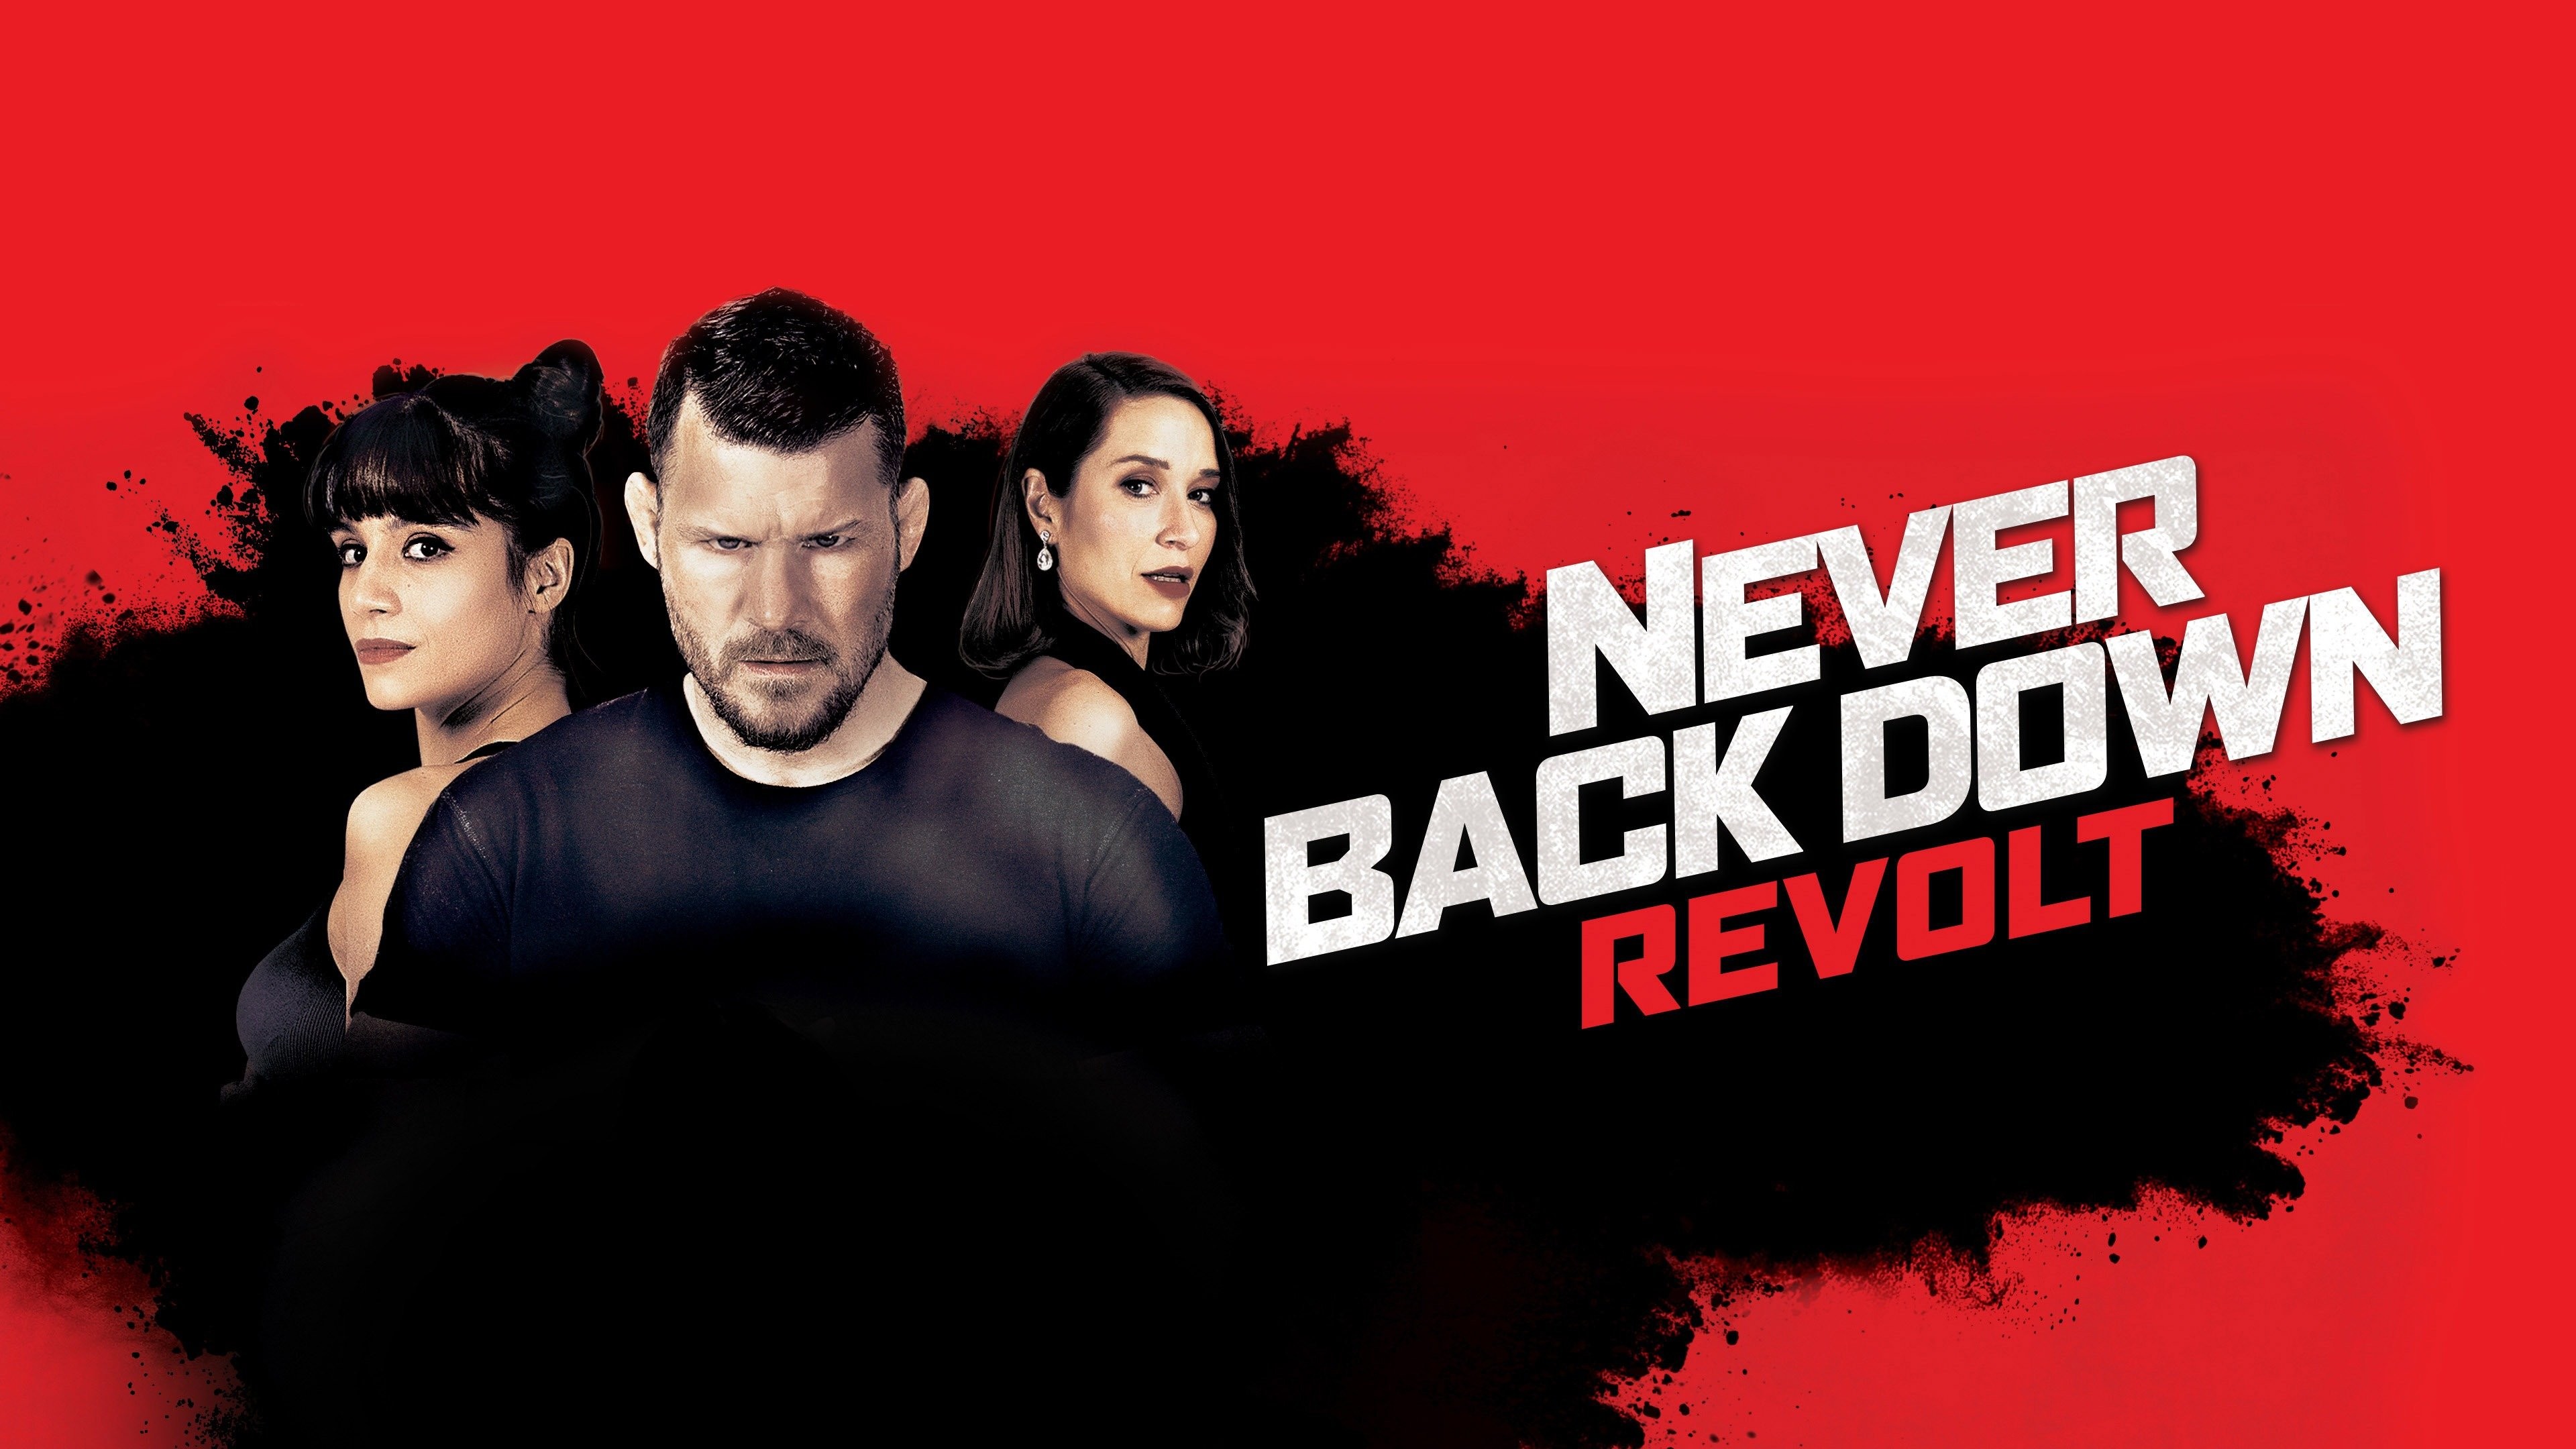 BookMyShow Stream to premiere action film 'Never Back Down: Revolt